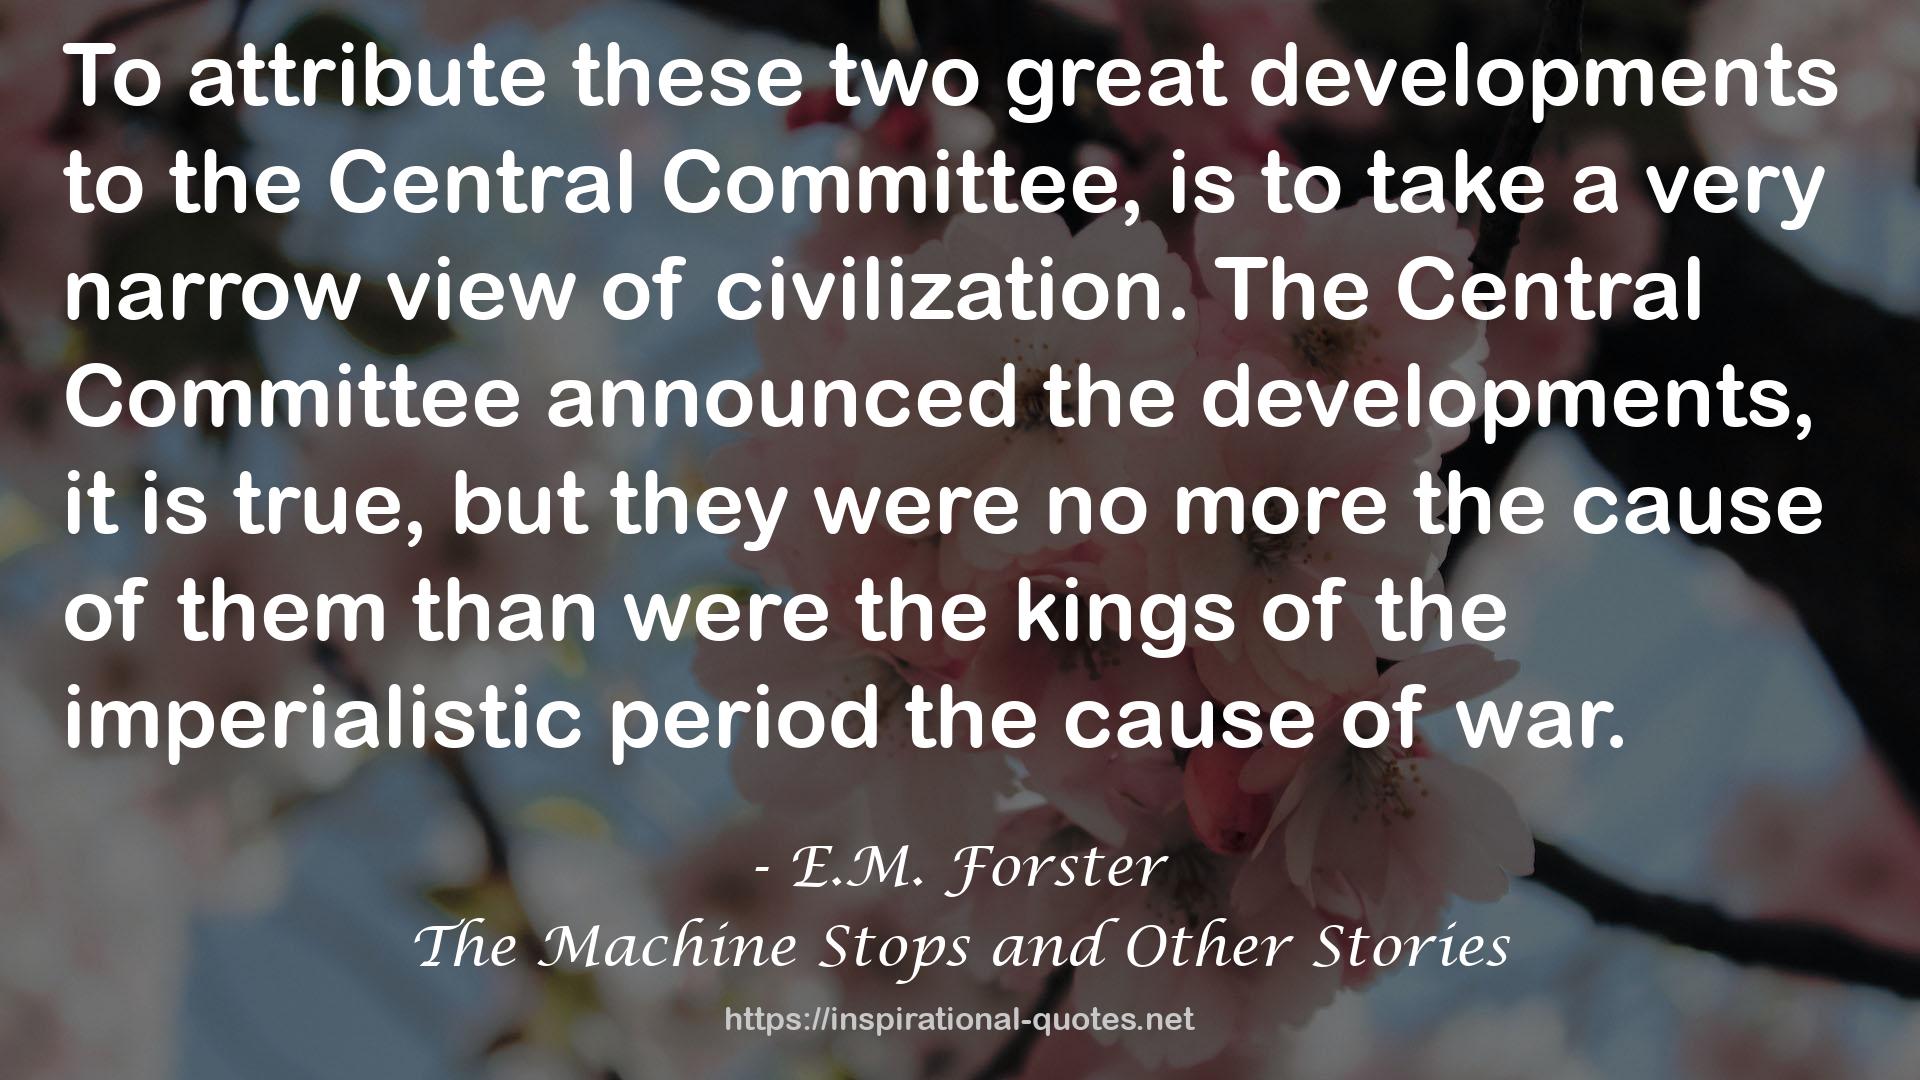 The Machine Stops and Other Stories QUOTES